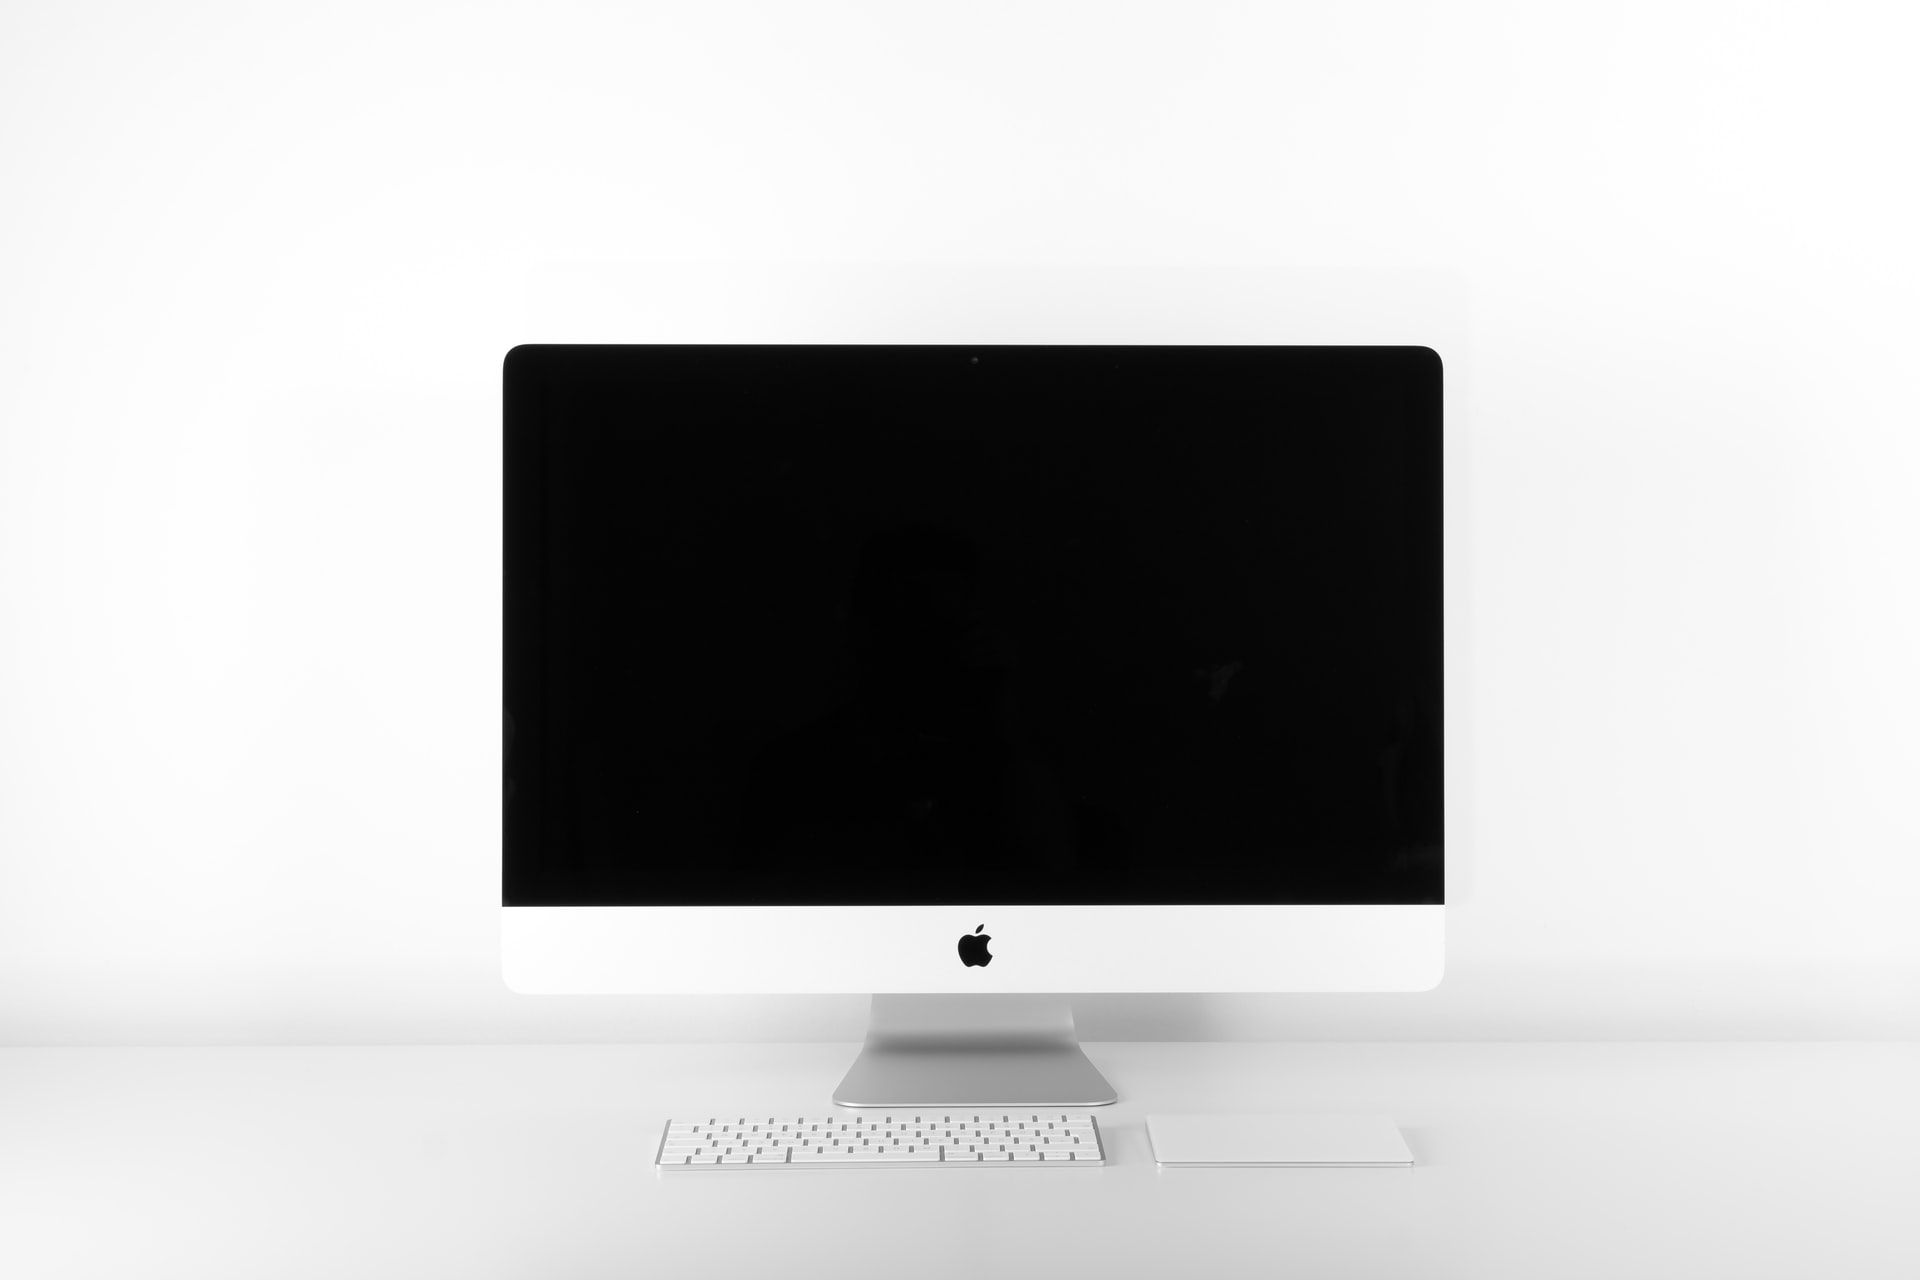 Fully Automated Lab iMac Deployment with Jamf Pro & ADE: Part 3 - Preparing for Application Deployment